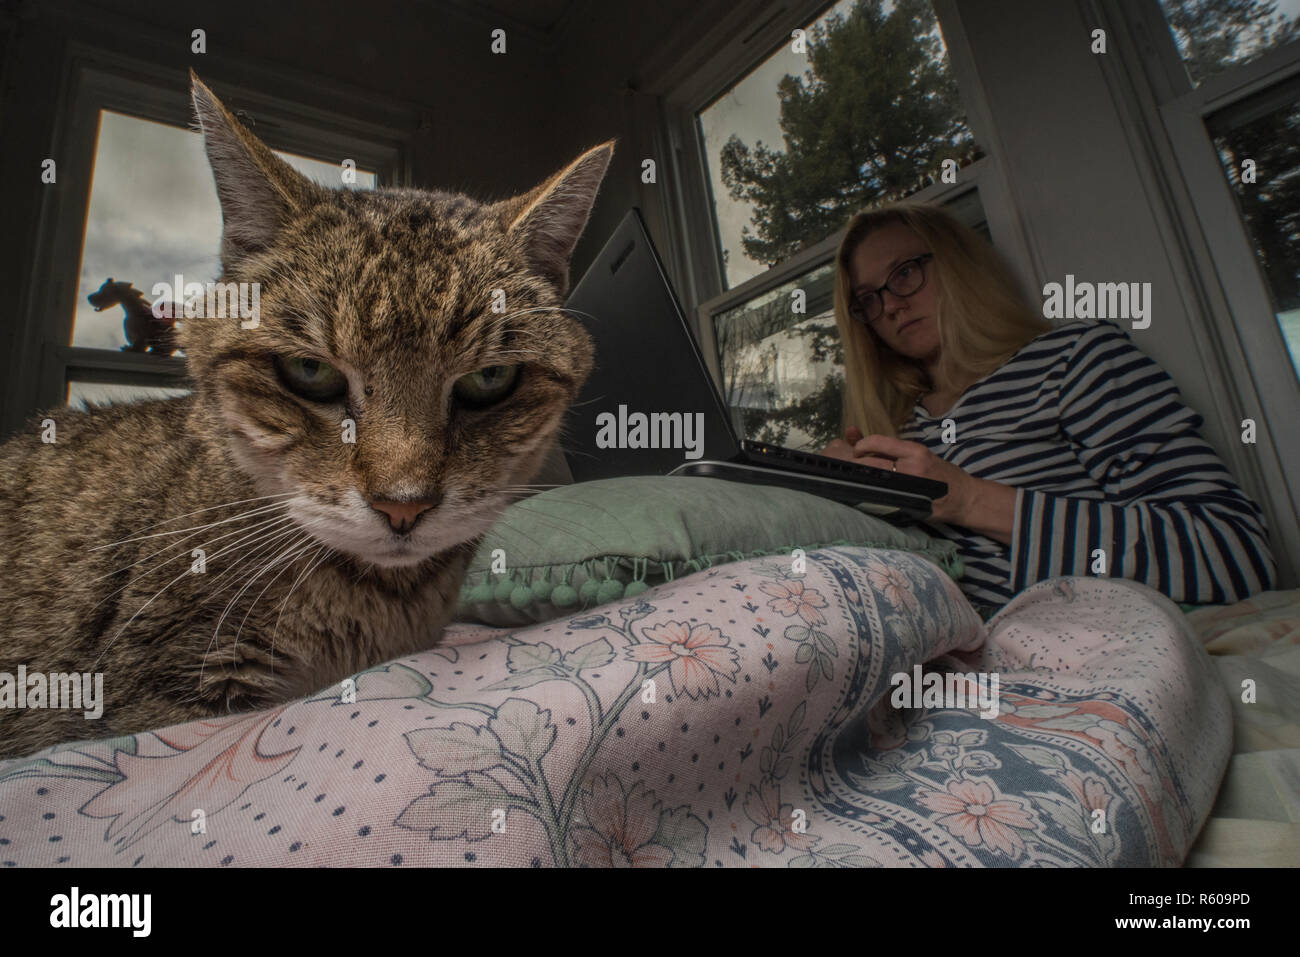 A cat looks annoyed that its owner is busy with something else and not paying any attention to it. Stock Photo